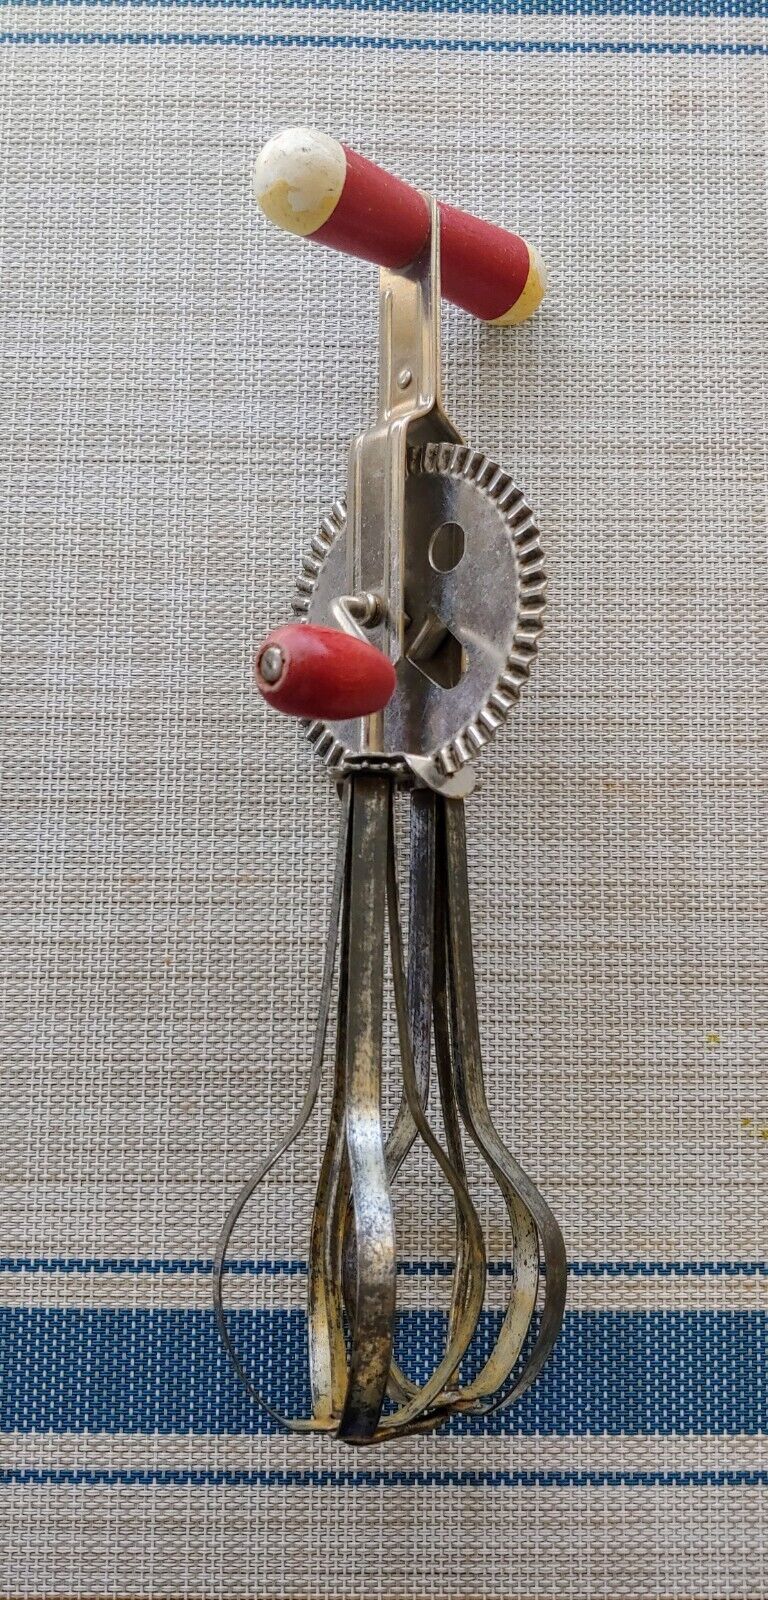 Vintage Metal Kitchen Hand Mixer | 1950s | Silver Egg Beater | Ecko | USA Red 